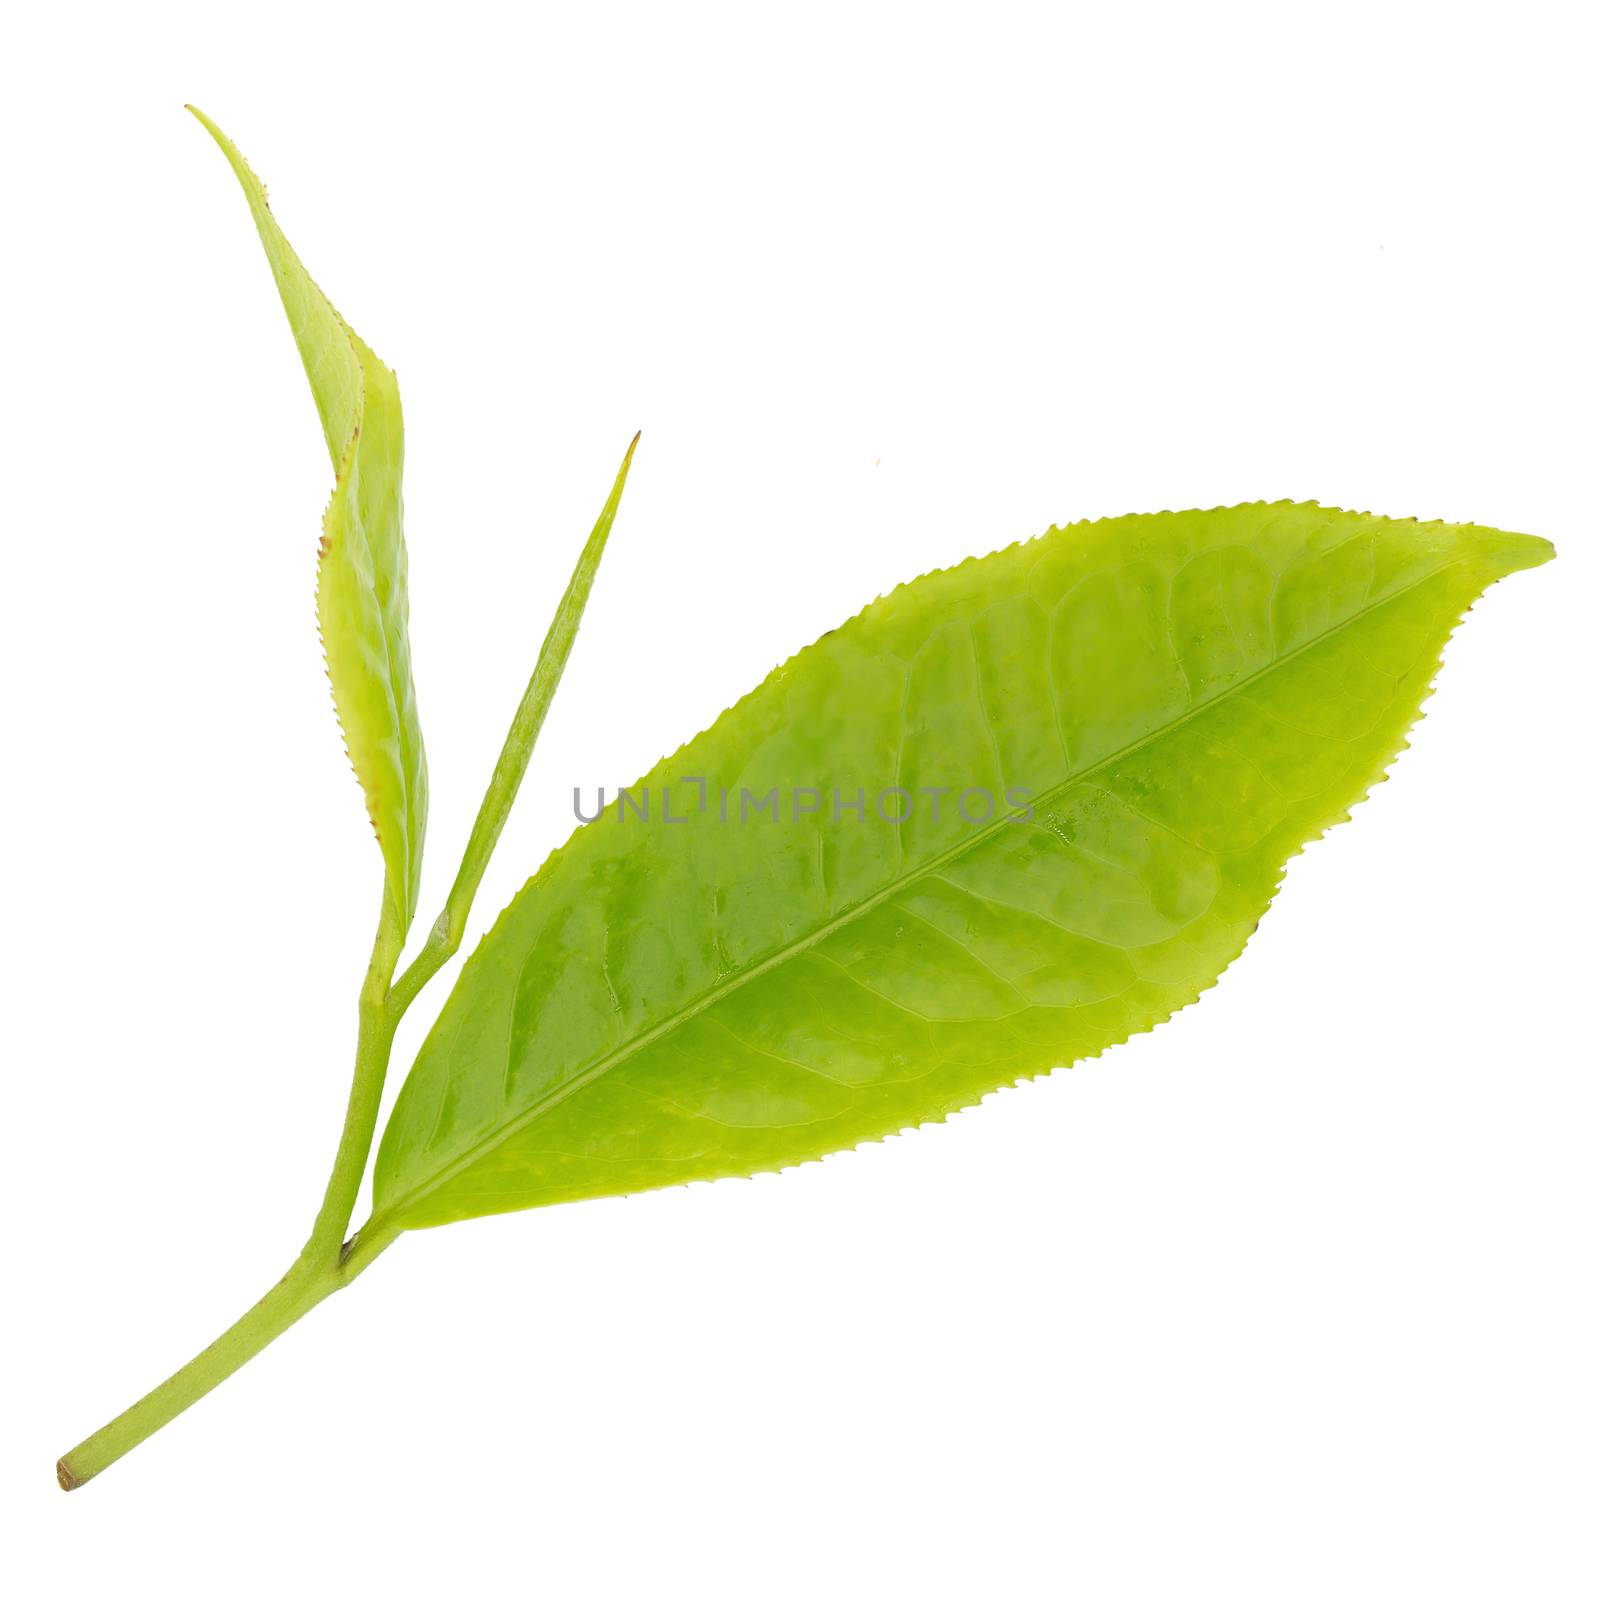 Fresh tea leaves isolated on the white background.